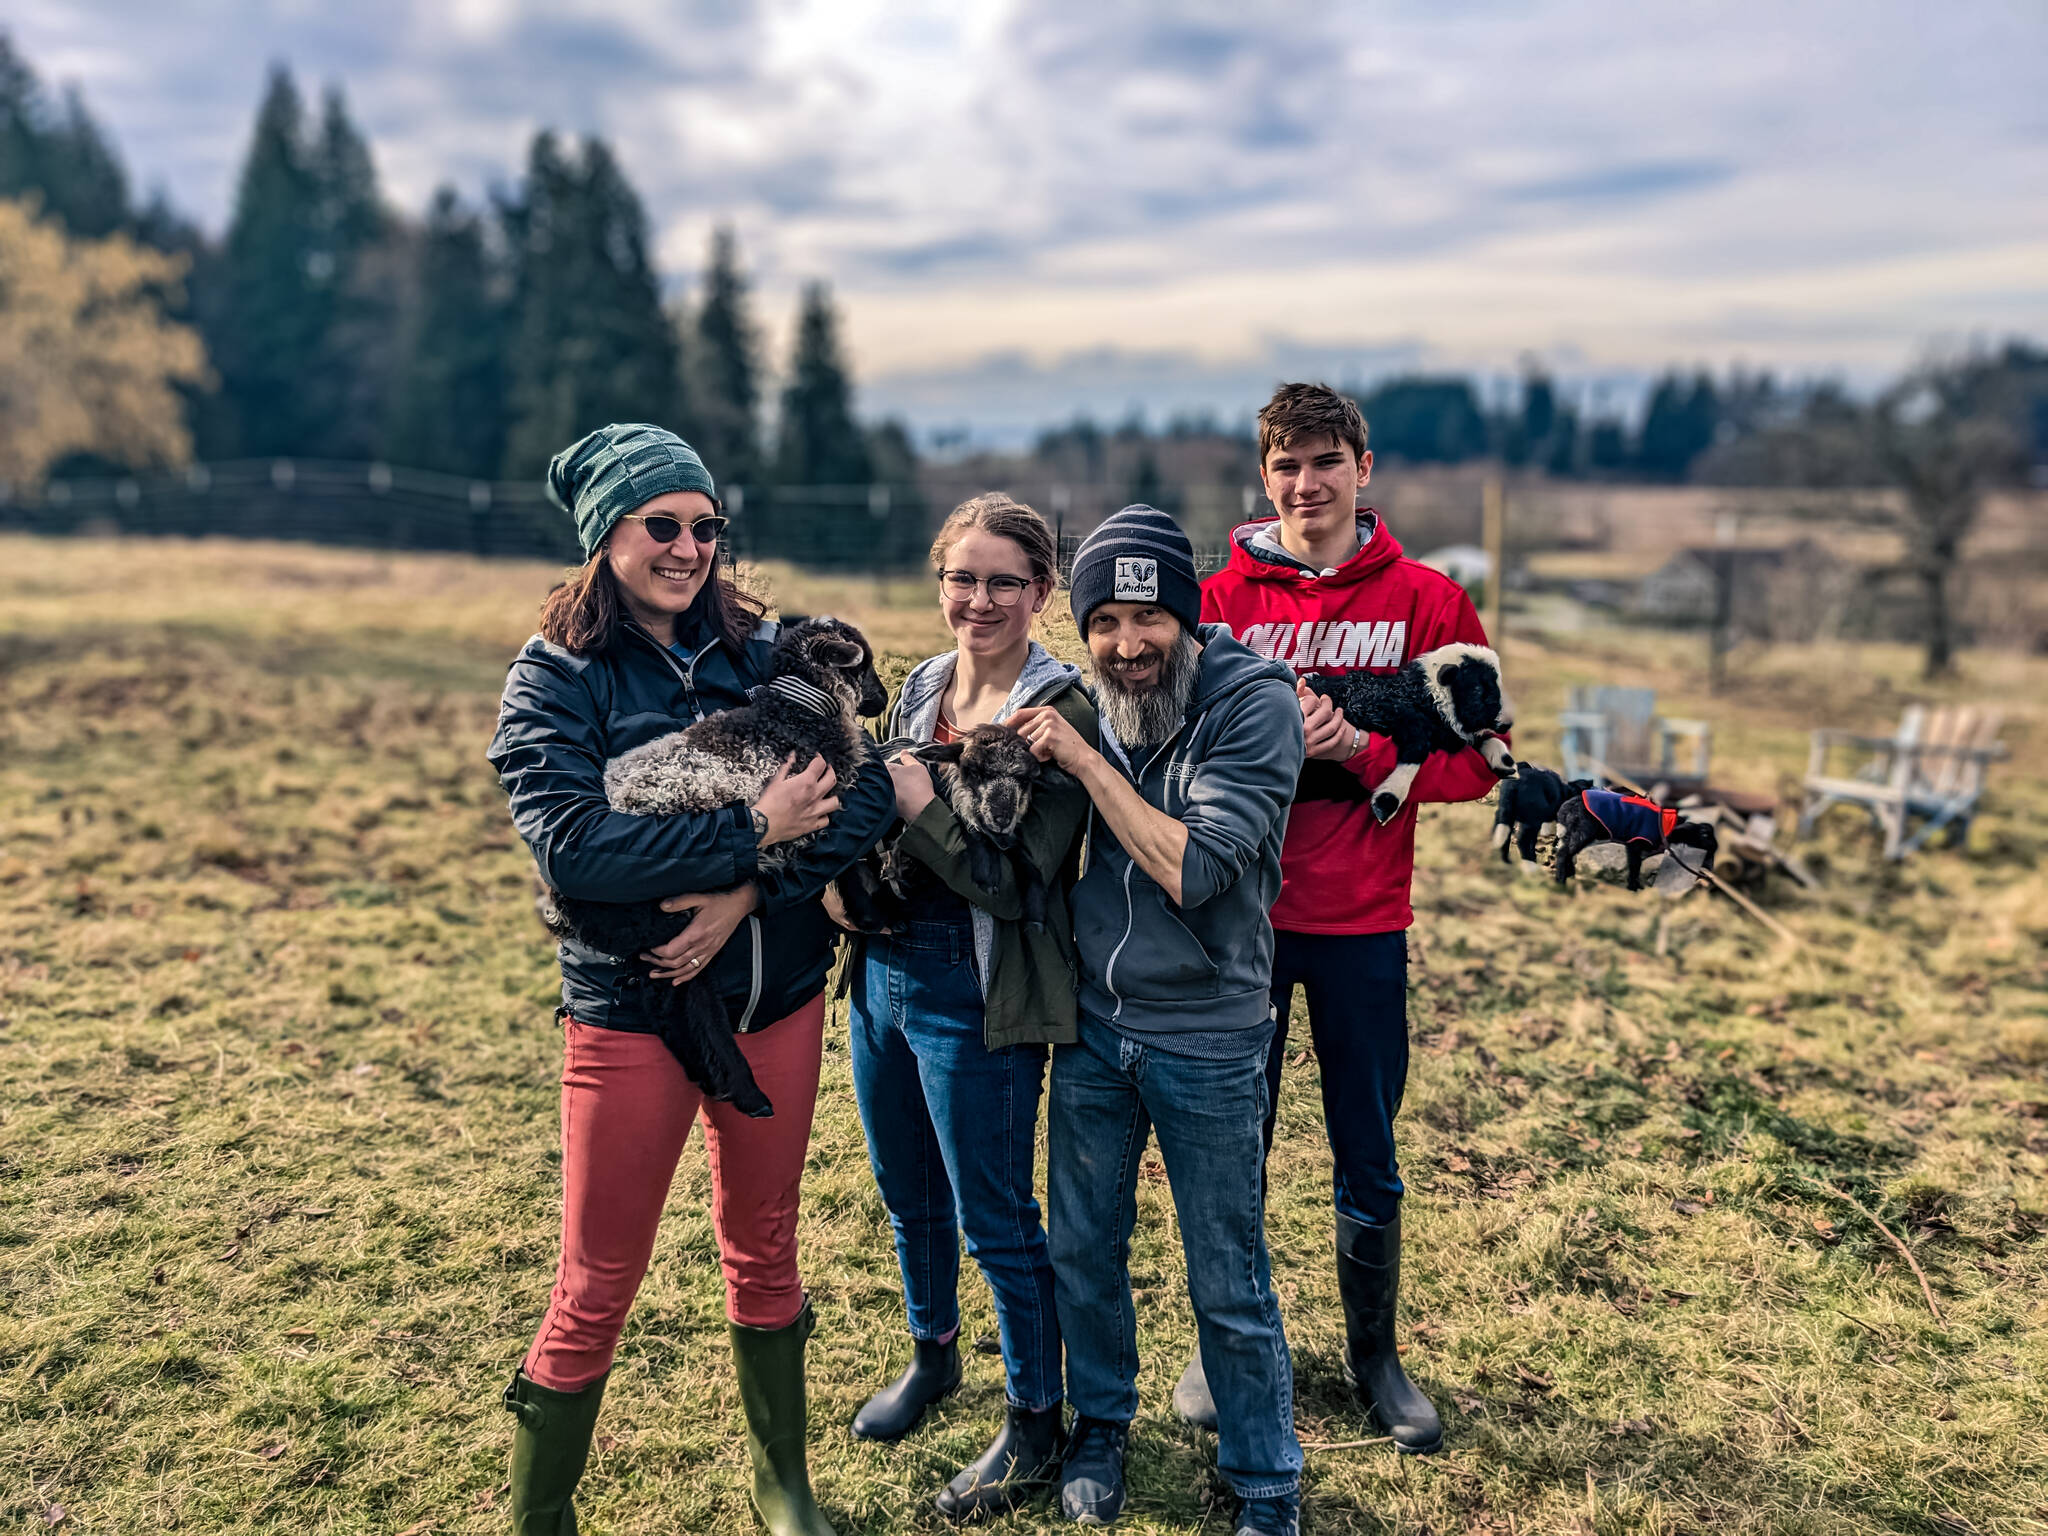 The Bell family adopted three rescue lambs from Ballydidean Farm Sanctuary this past spring. From left, Emily with Poppet, Zetta with Widget, Shaun and Tyson with Otis. (Photo provided)